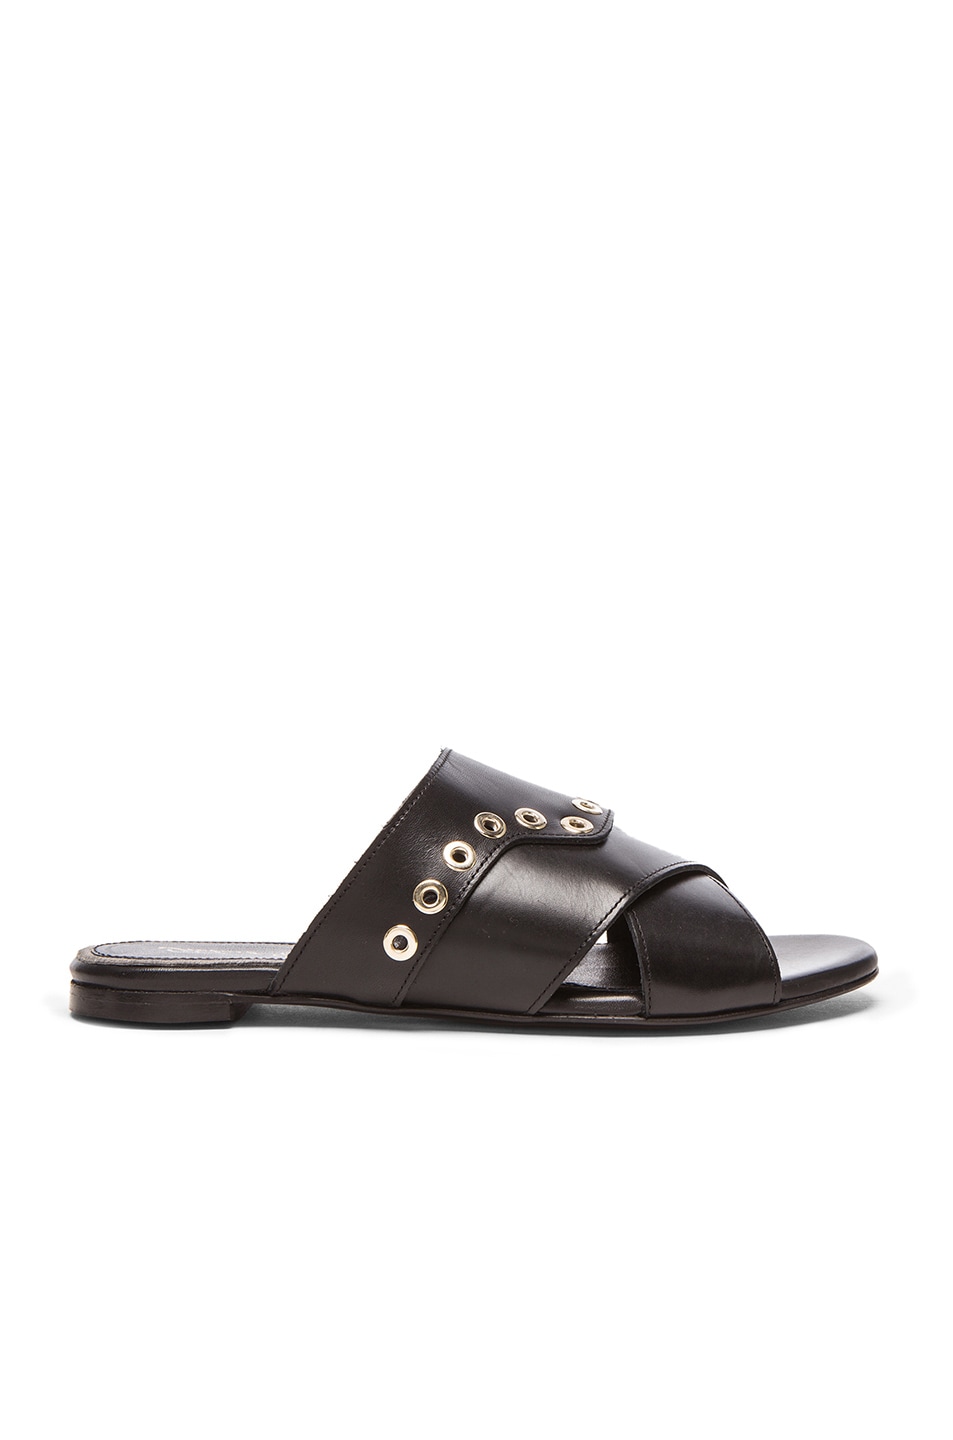 Image 1 of Robert Clergerie Grommet Studded Leather Sandals in Black